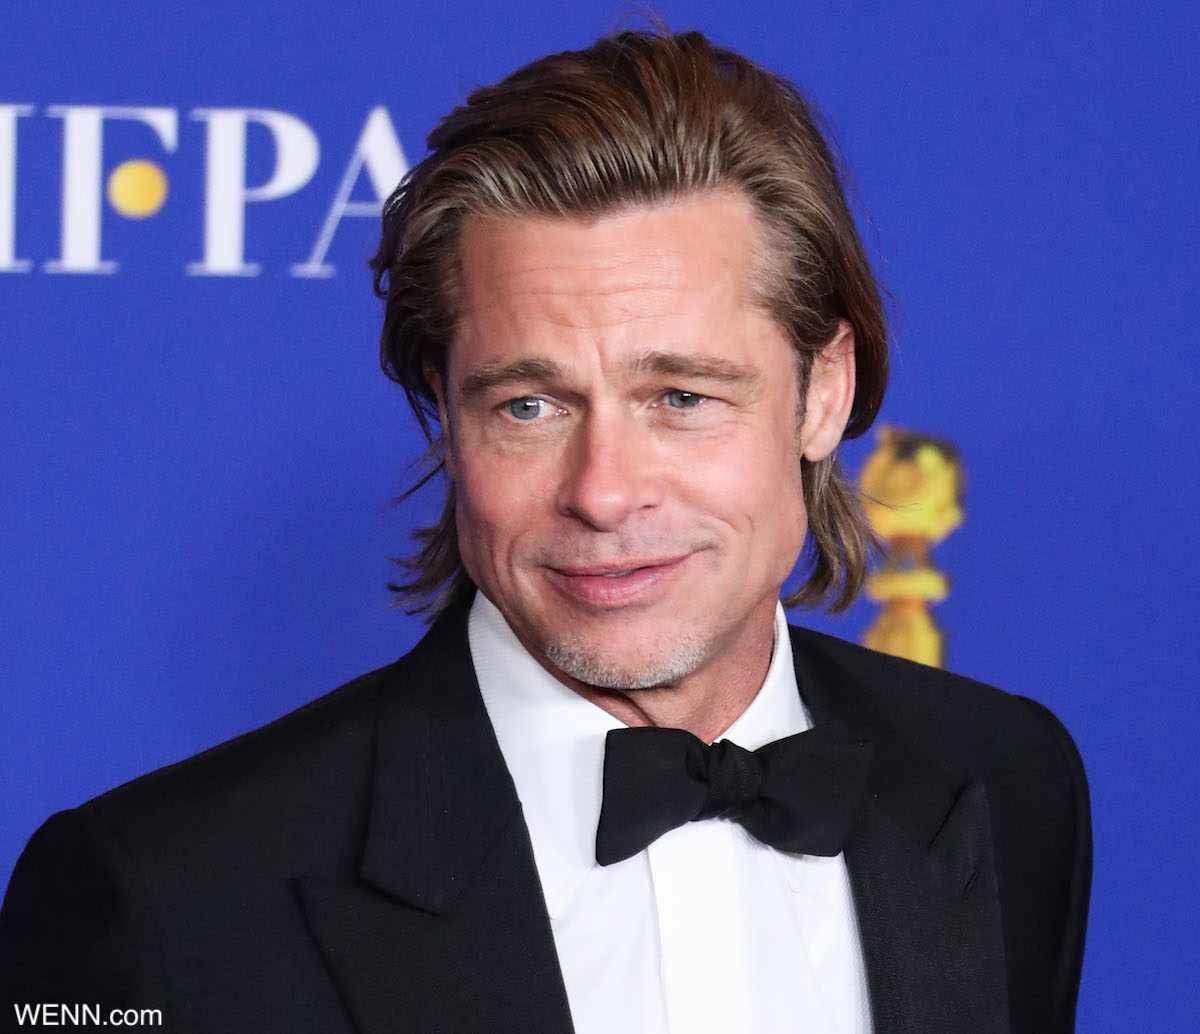 Actor Brad Pitt wearing a Brioni tux poses in the press room at the 77th Annual Golden Globe Awards held at The Beverly Hilton Hotel on January 5, 2020 in Beverly Hills, Los Angeles, California, United States. Where: Beverly Hills, California, United States When: 05 Jan 2020 Credit: WENN/Avalon **WENN/Avalon**